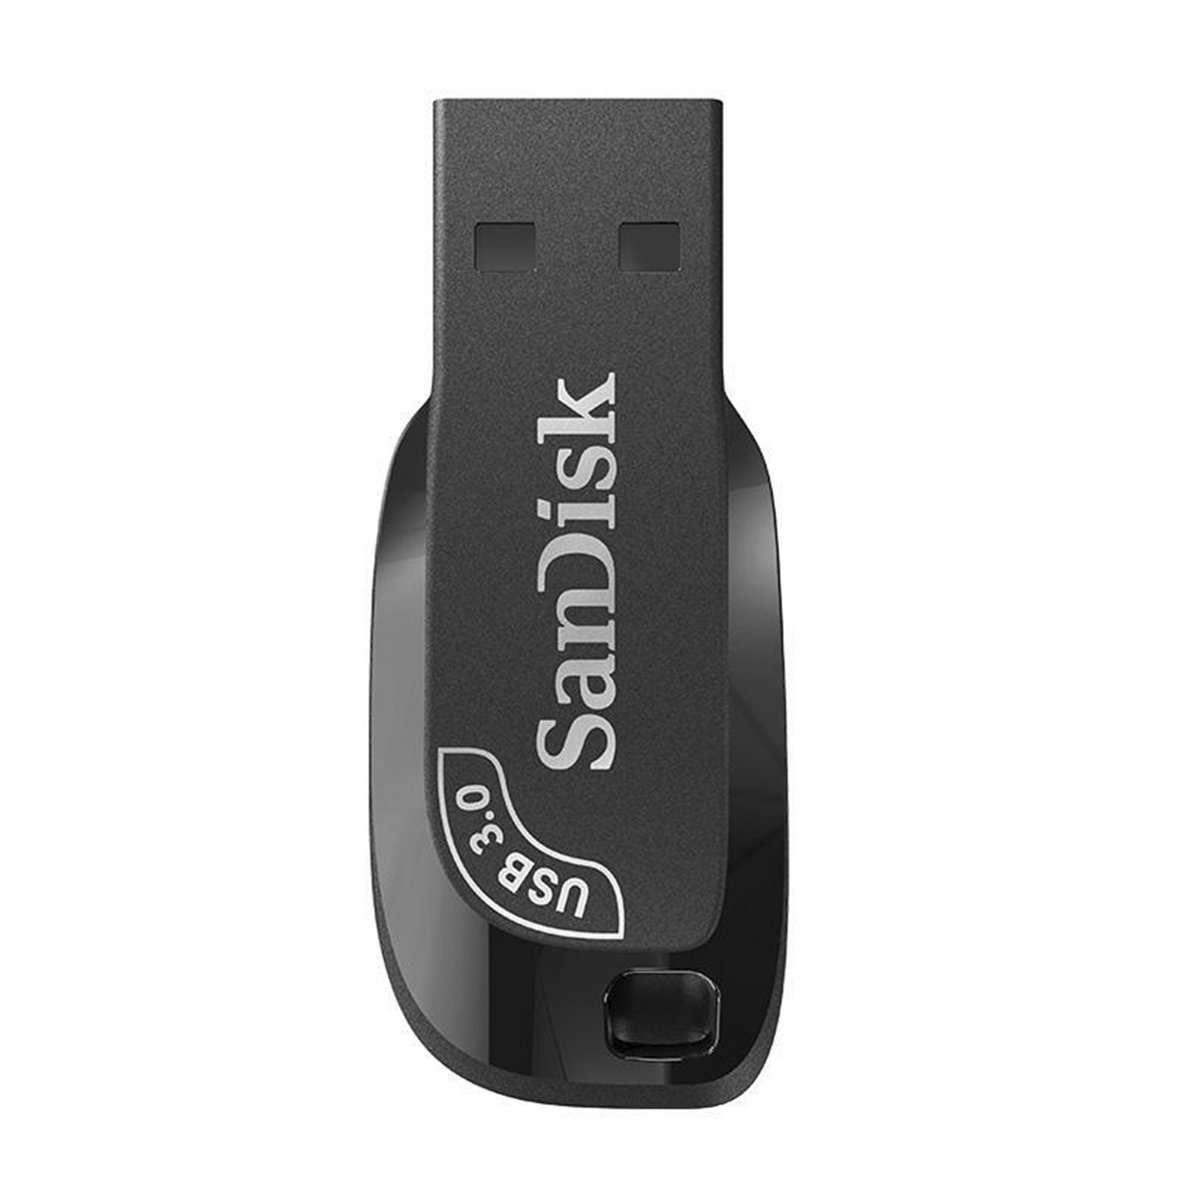 SanDisk 64GB Ultra Shift USB 3.0 Flash Drive, Speed Up to 100MB/s (SDCZ410-064G-G46)